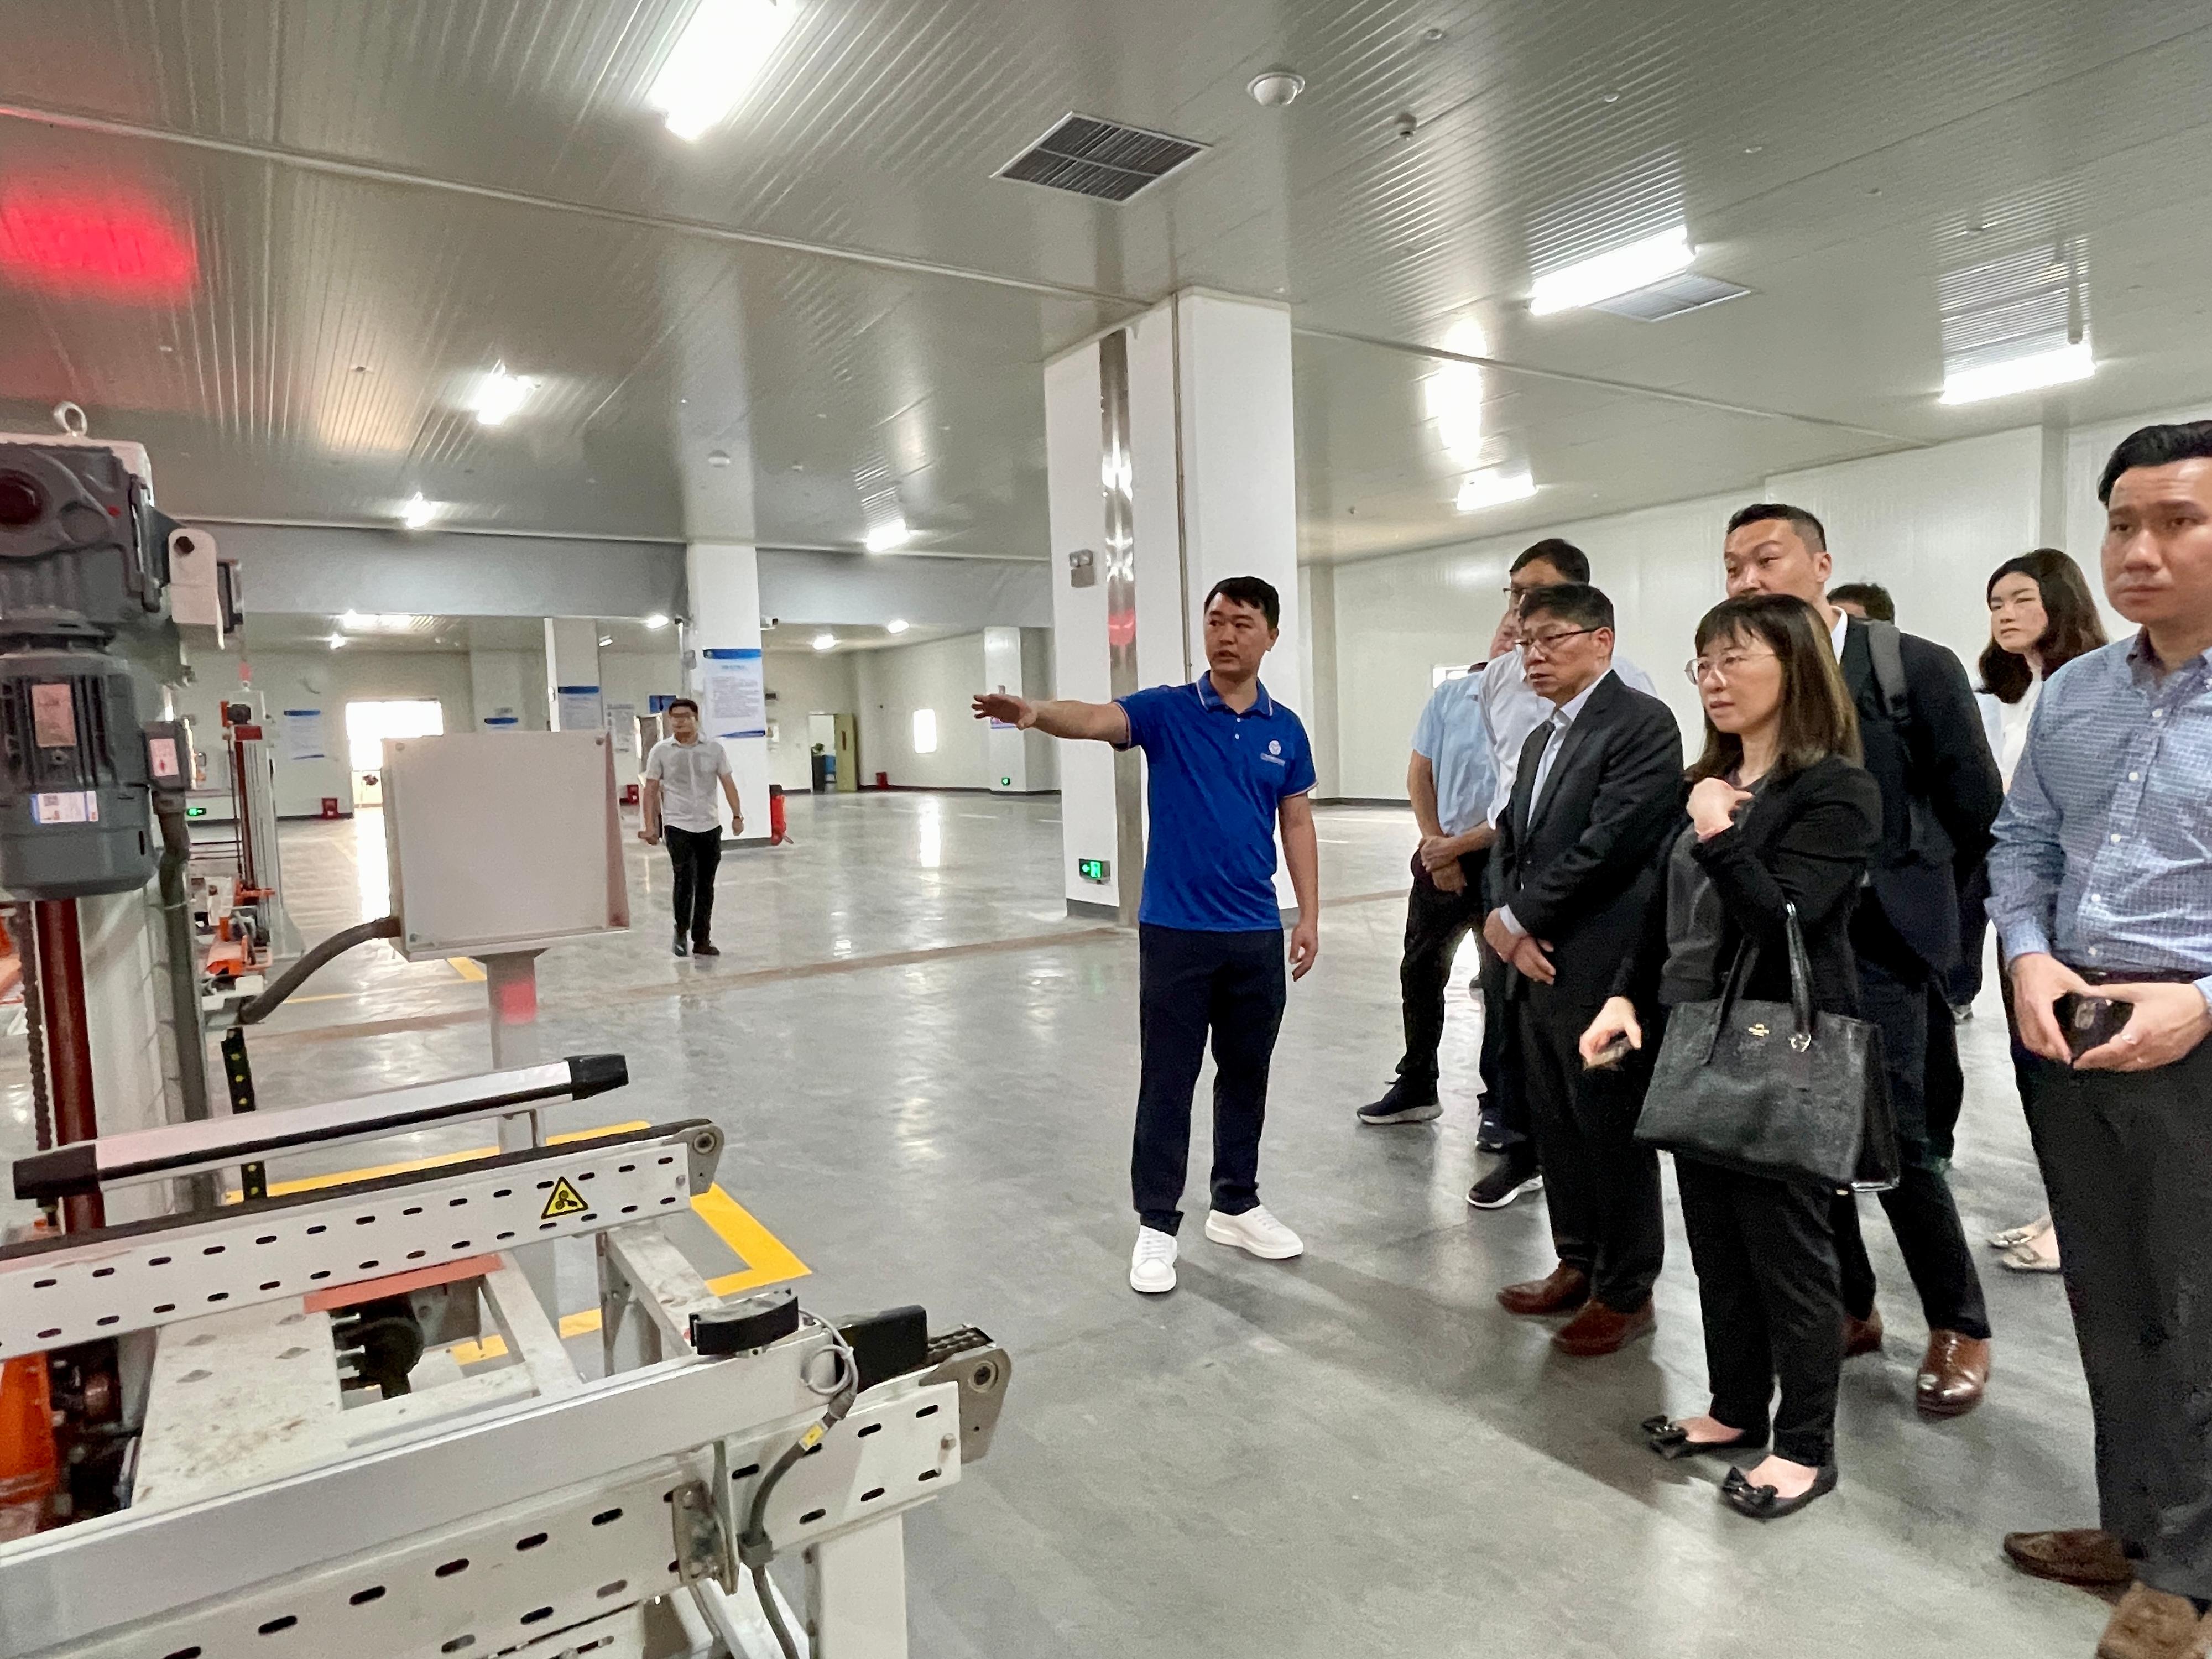 The Secretary for Transport and Logistics, Mr Lam Sai-hung (third right), visited a leading cold-chain logistics company in Guangdong Province today (June 5) to see their advanced facilities. Deputy Secretary for Transport and Logistics and the Commissioner for Maritime and Port Development, Miss Amy Chan (second right), joined the visit. 